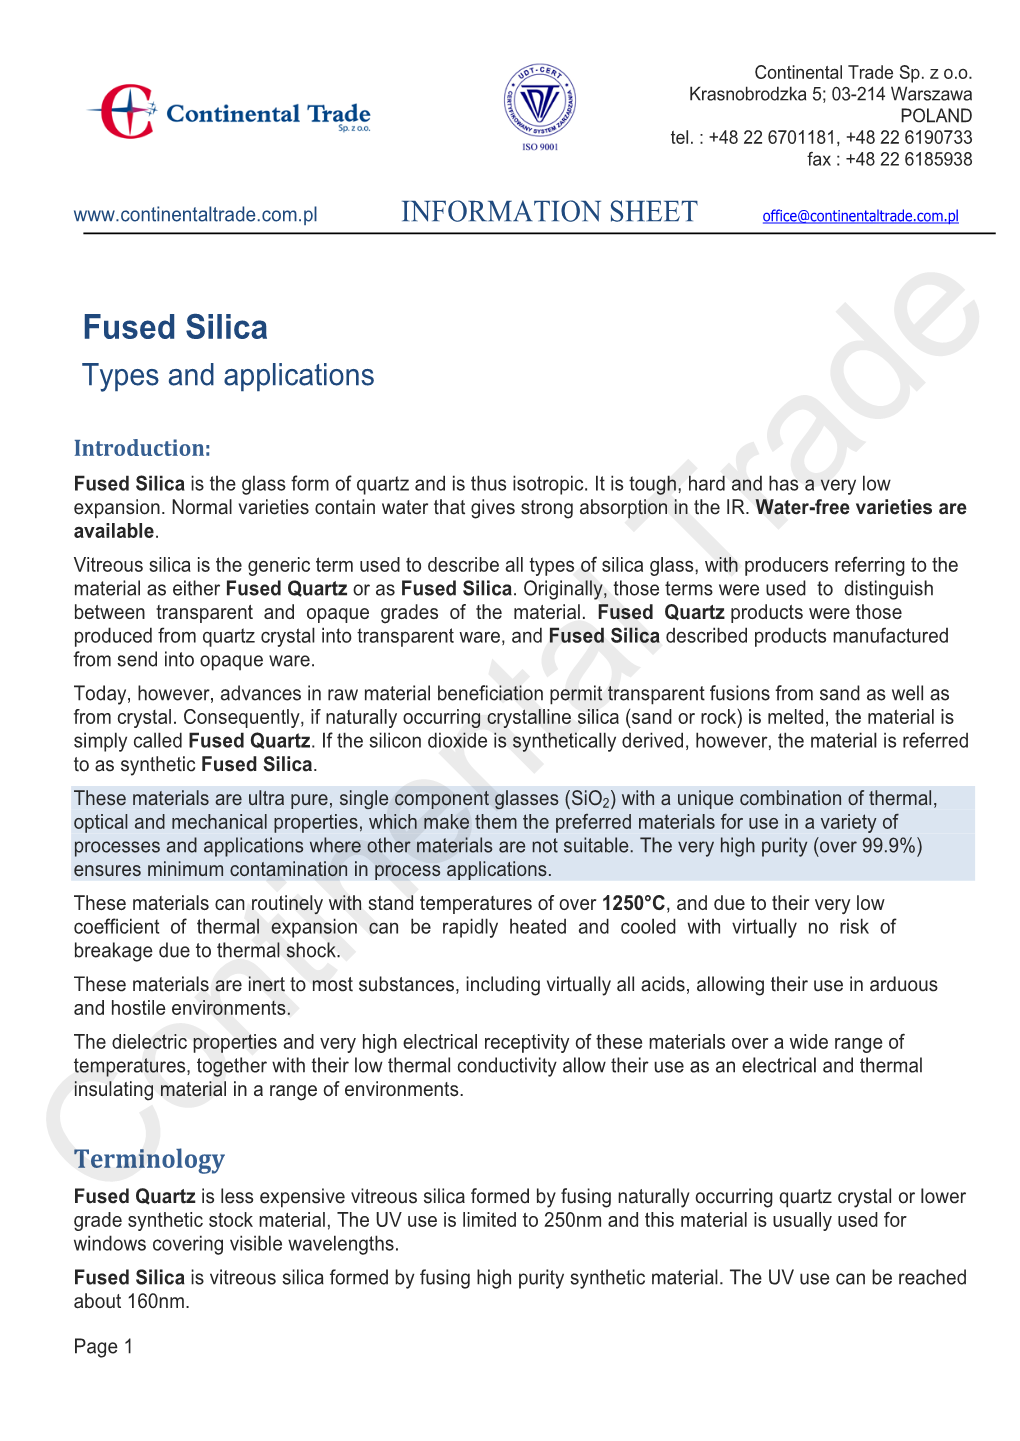 Fused Silica Types and Applications